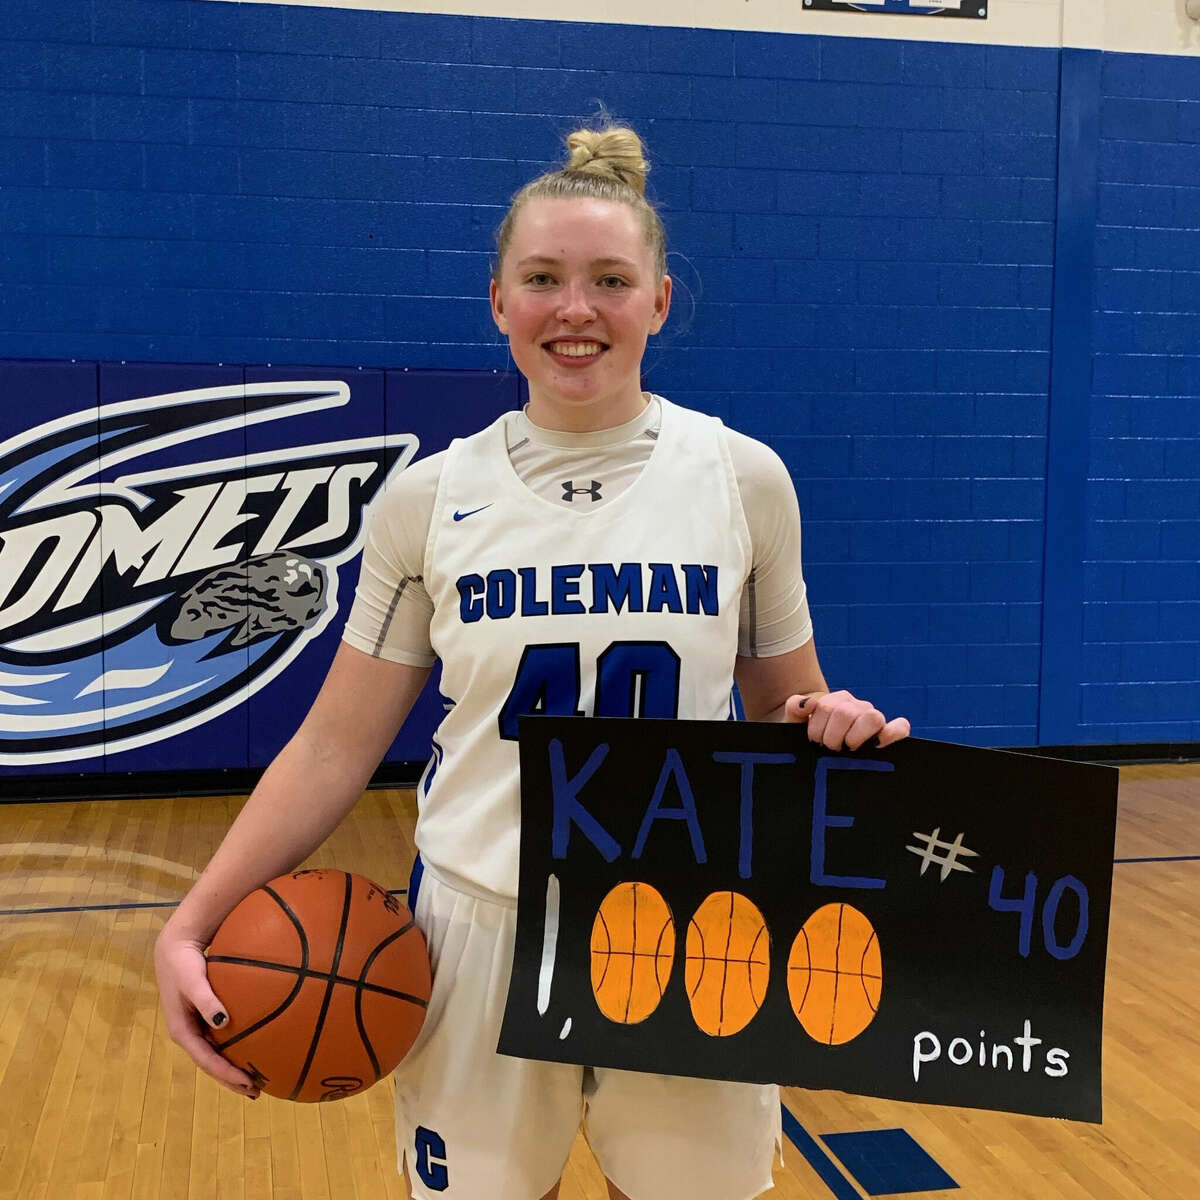 Coleman's Katelyn Pnacek poses with a commemorative sign after reaching the 1,000-point mark for her career in Thursday's win over Breckenridge, Jan. 27, 2022. Pnacek scored 28 points on Saturday to become the all-time leading scorers in school history.